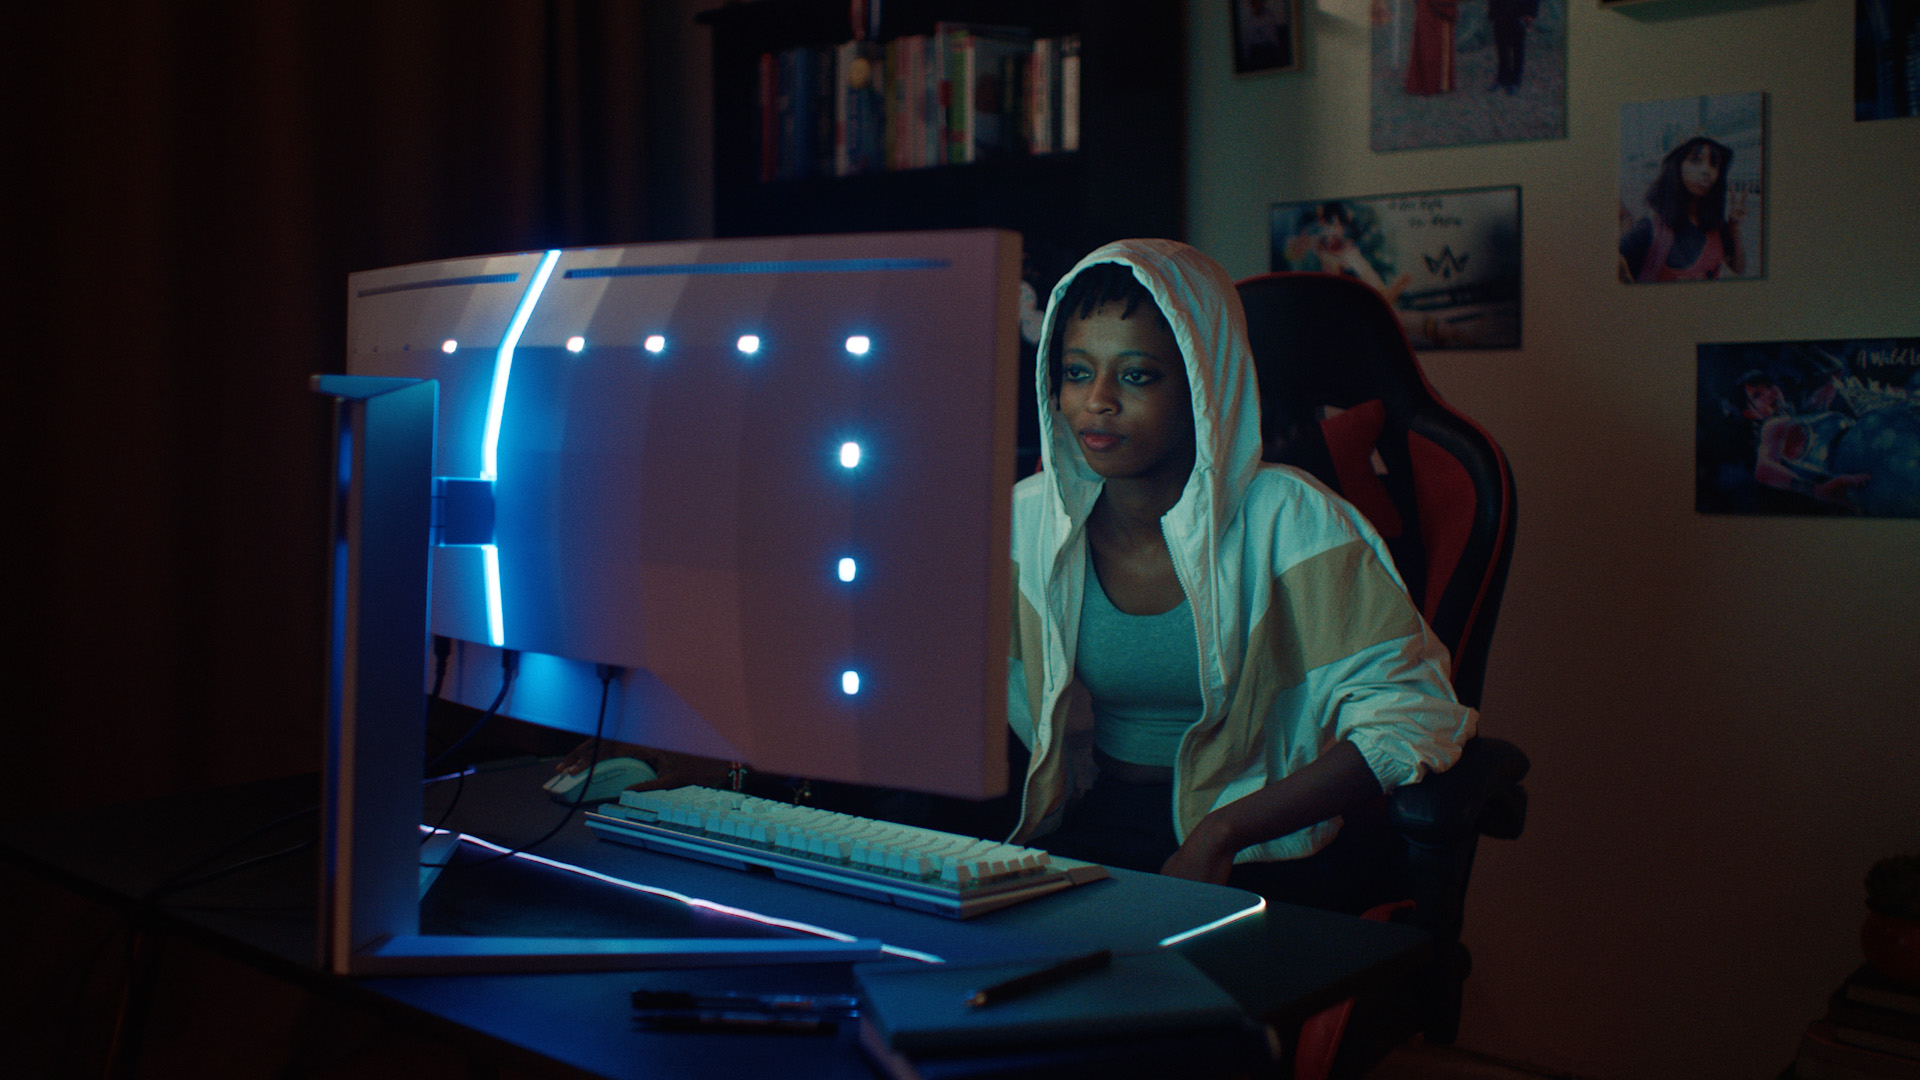 A black woman sits in front of an Evnia monitor playing games